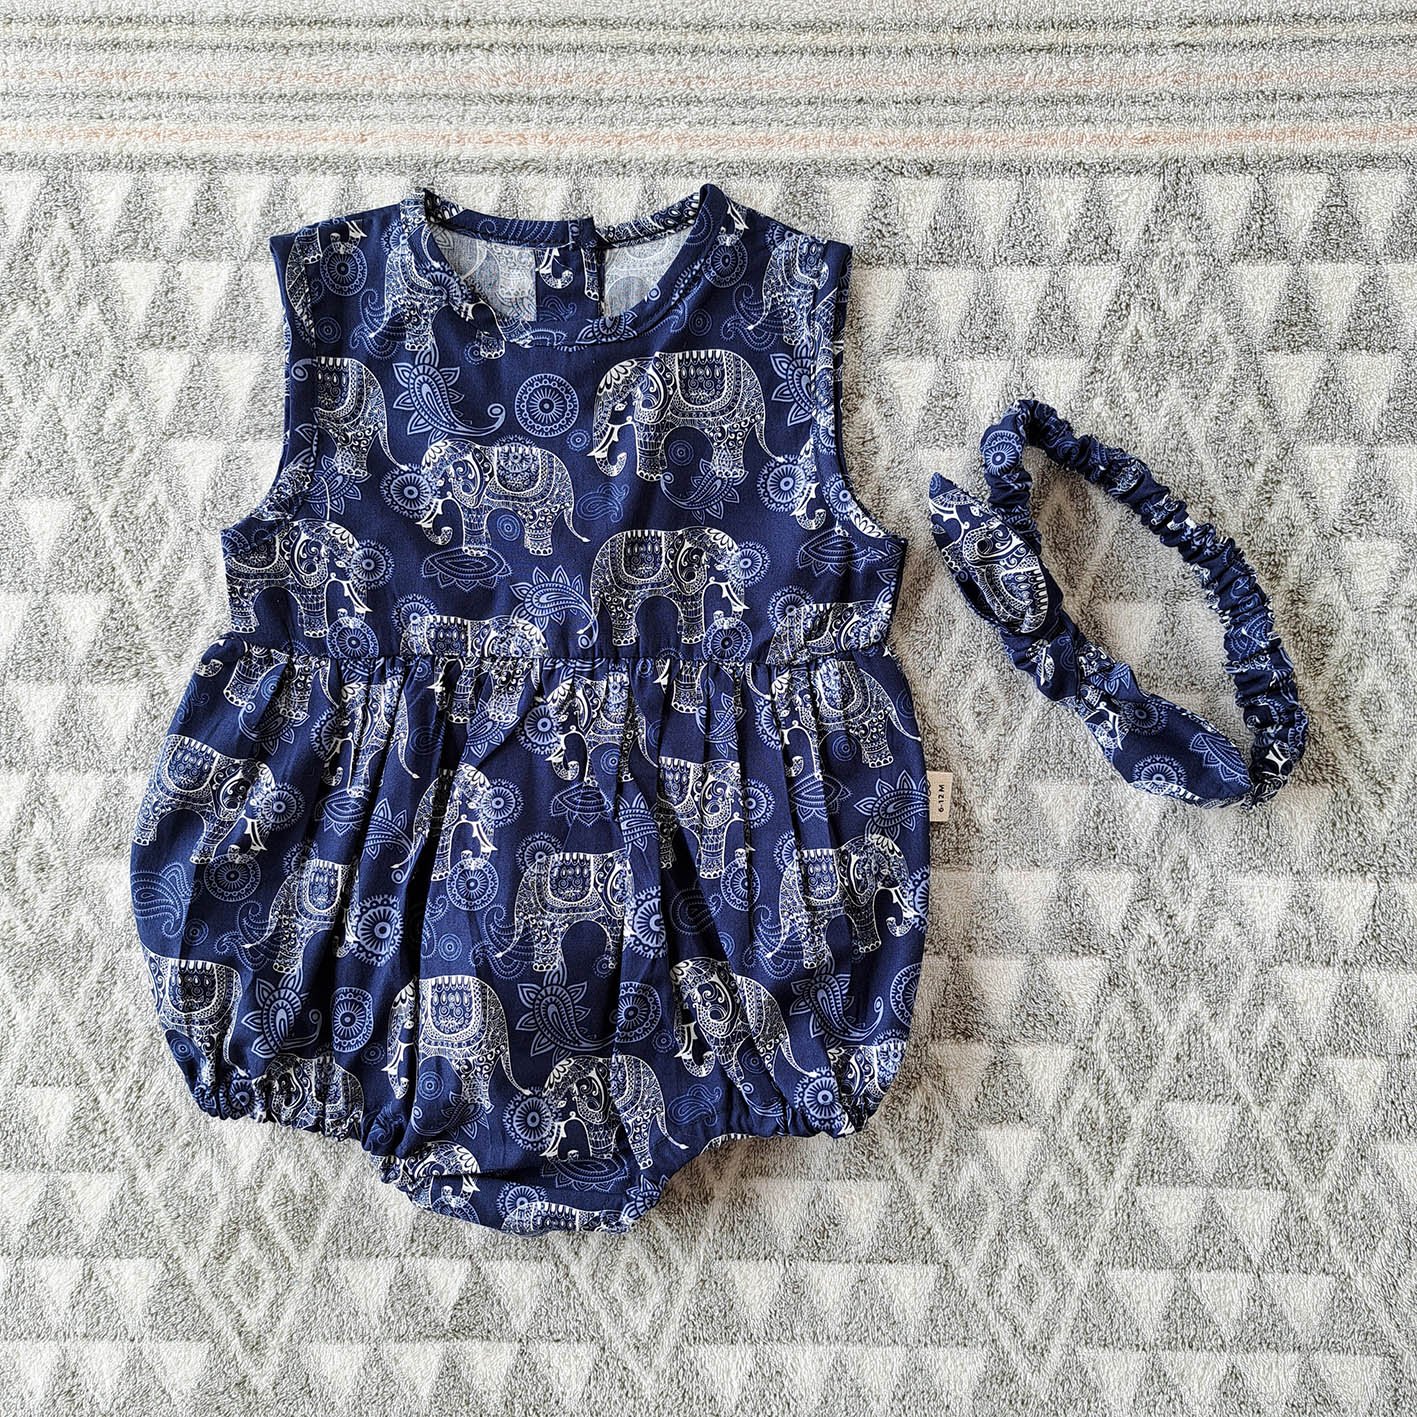 BUTTONS BACK THAI ELEPHANTS NAVY BLUE ROMPER 100% PRINTED COTTON*HEADBAND NOT INCLUDED